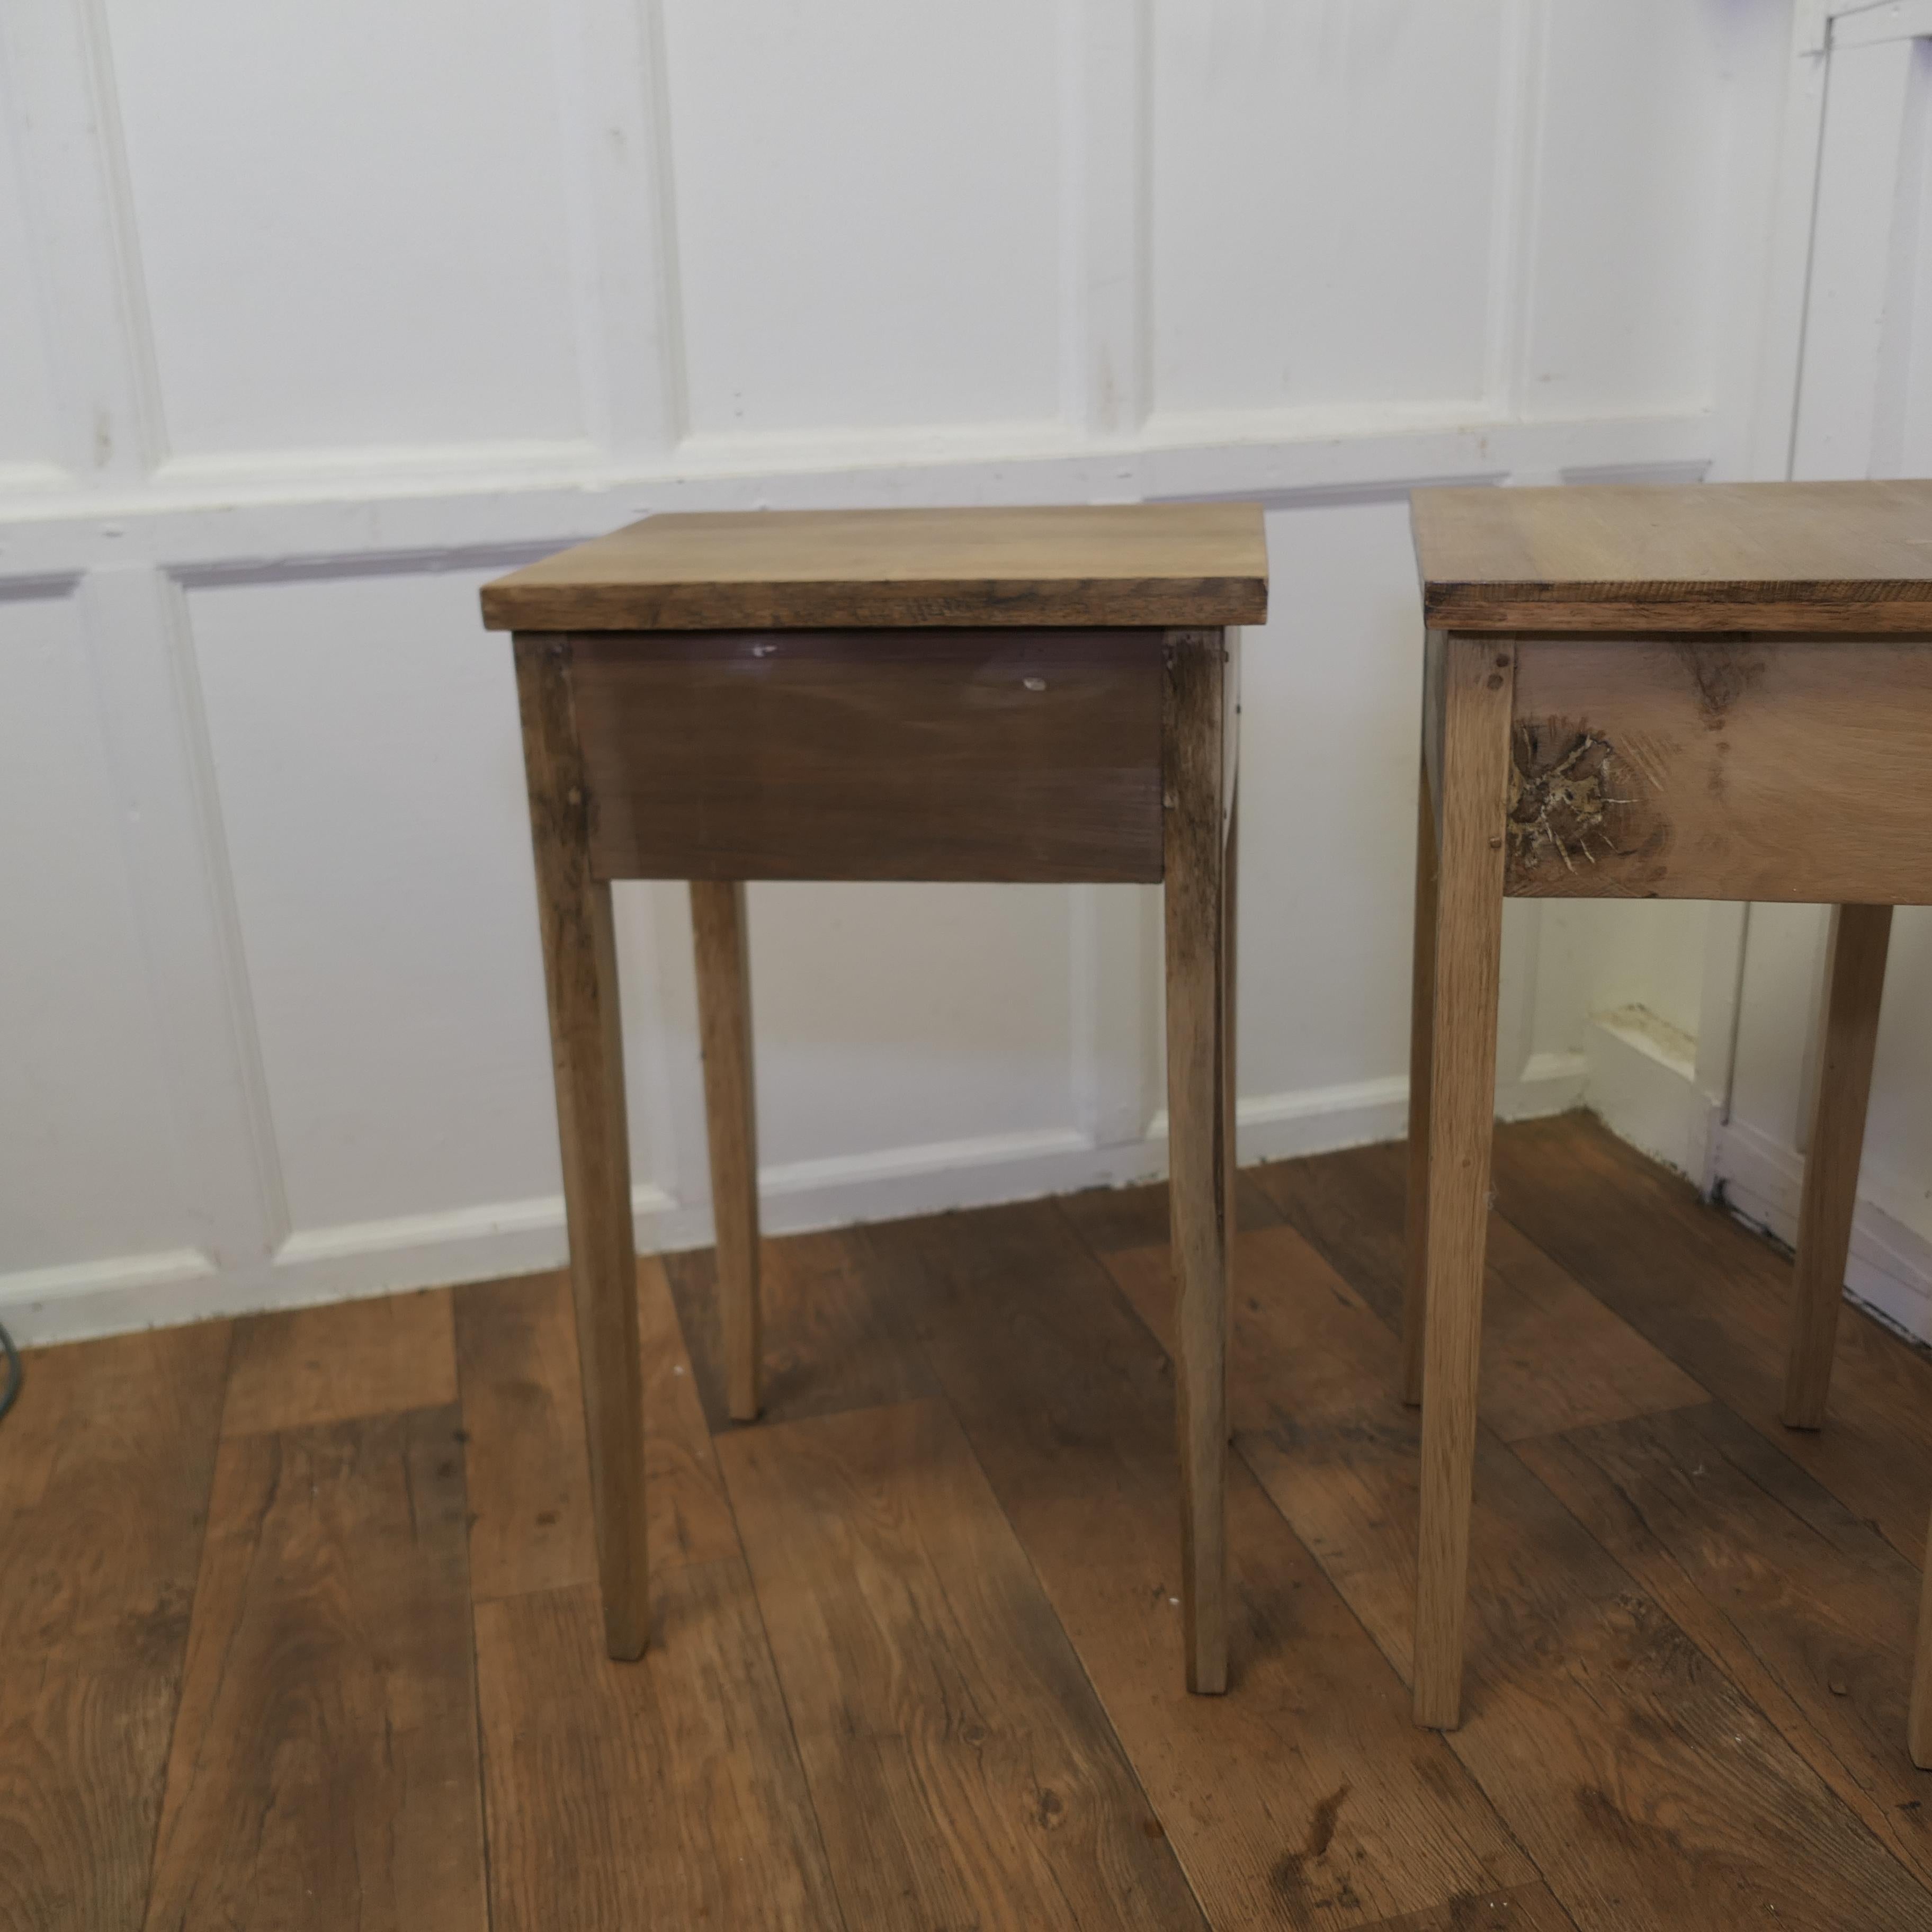  Pair of Bleached Oak Mid Century Bedside Tables  3